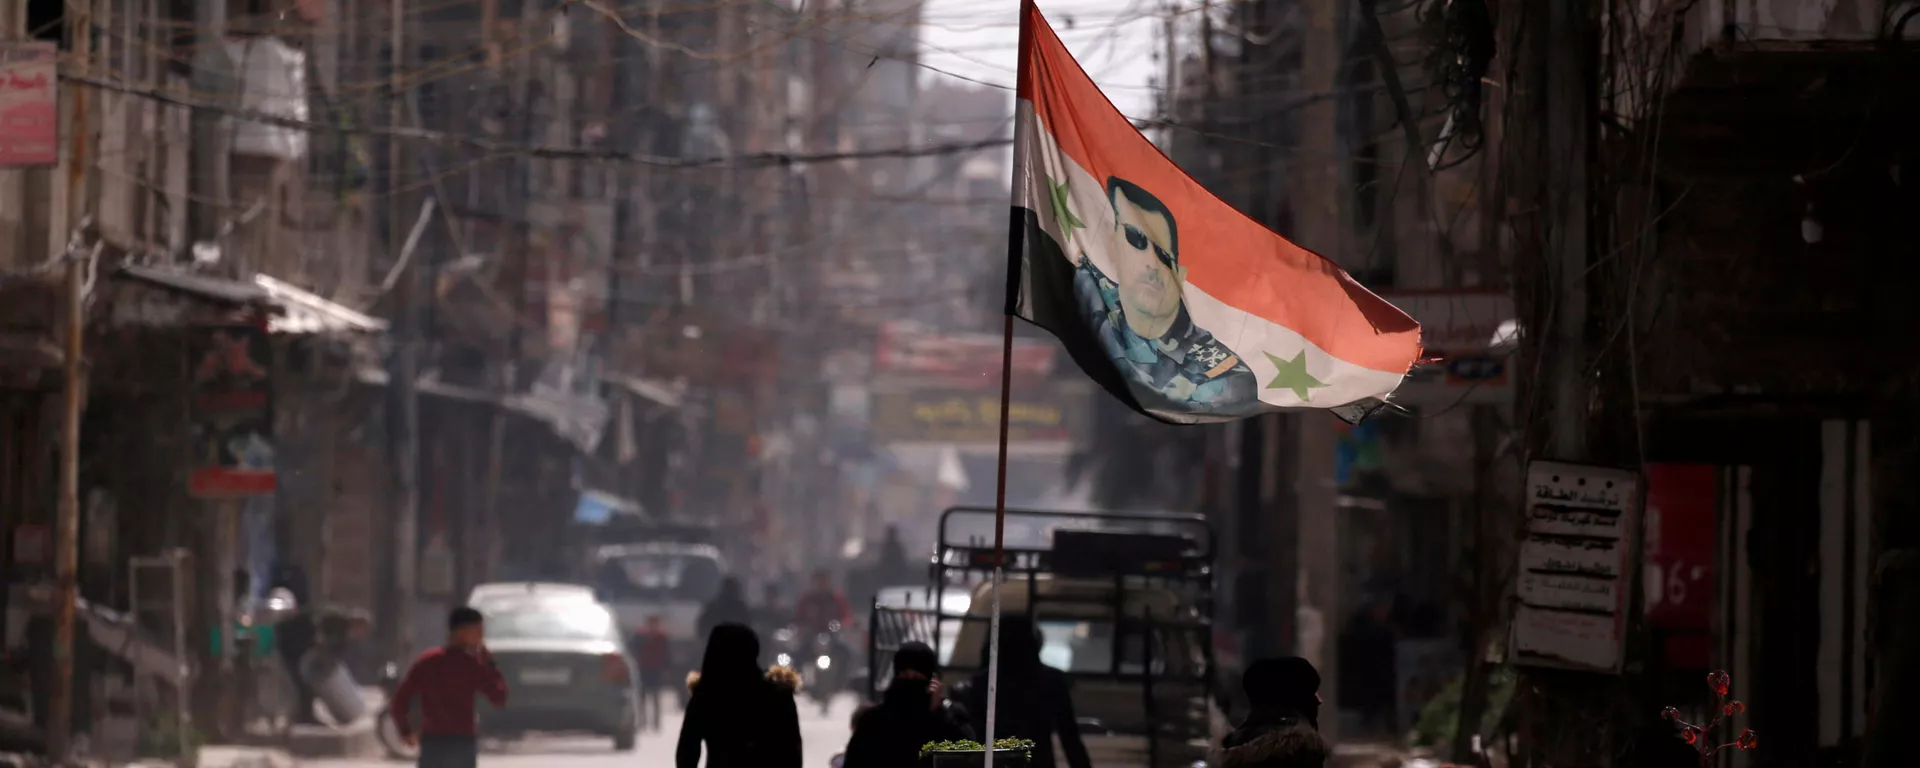 A national flag depicting a picture of Syria's President Bashar al-Assad flutters at a checkpoint in Douma, in the eastern suburbs of Damascus, Syria March 10, 2021. Picture taken March 10, 2021. - Sputnik International, 1920, 25.06.2021